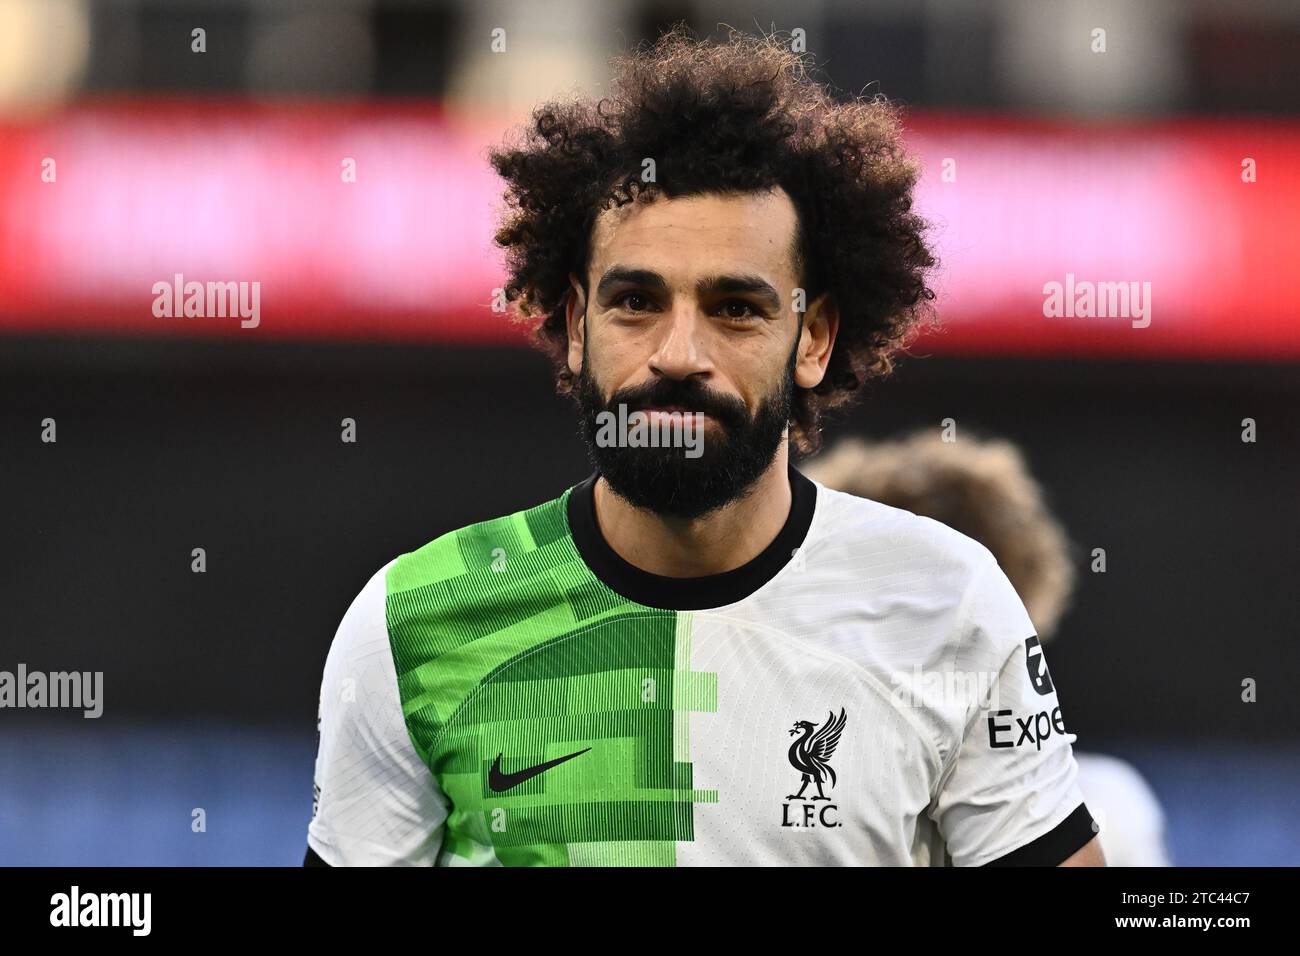 LONDON, ENGLAND - DECEMBER 9: Mohamed Salah of Liverpool FC headshot, head shot, face during the Premier League match between Crystal Palace and Liver Stock Photo